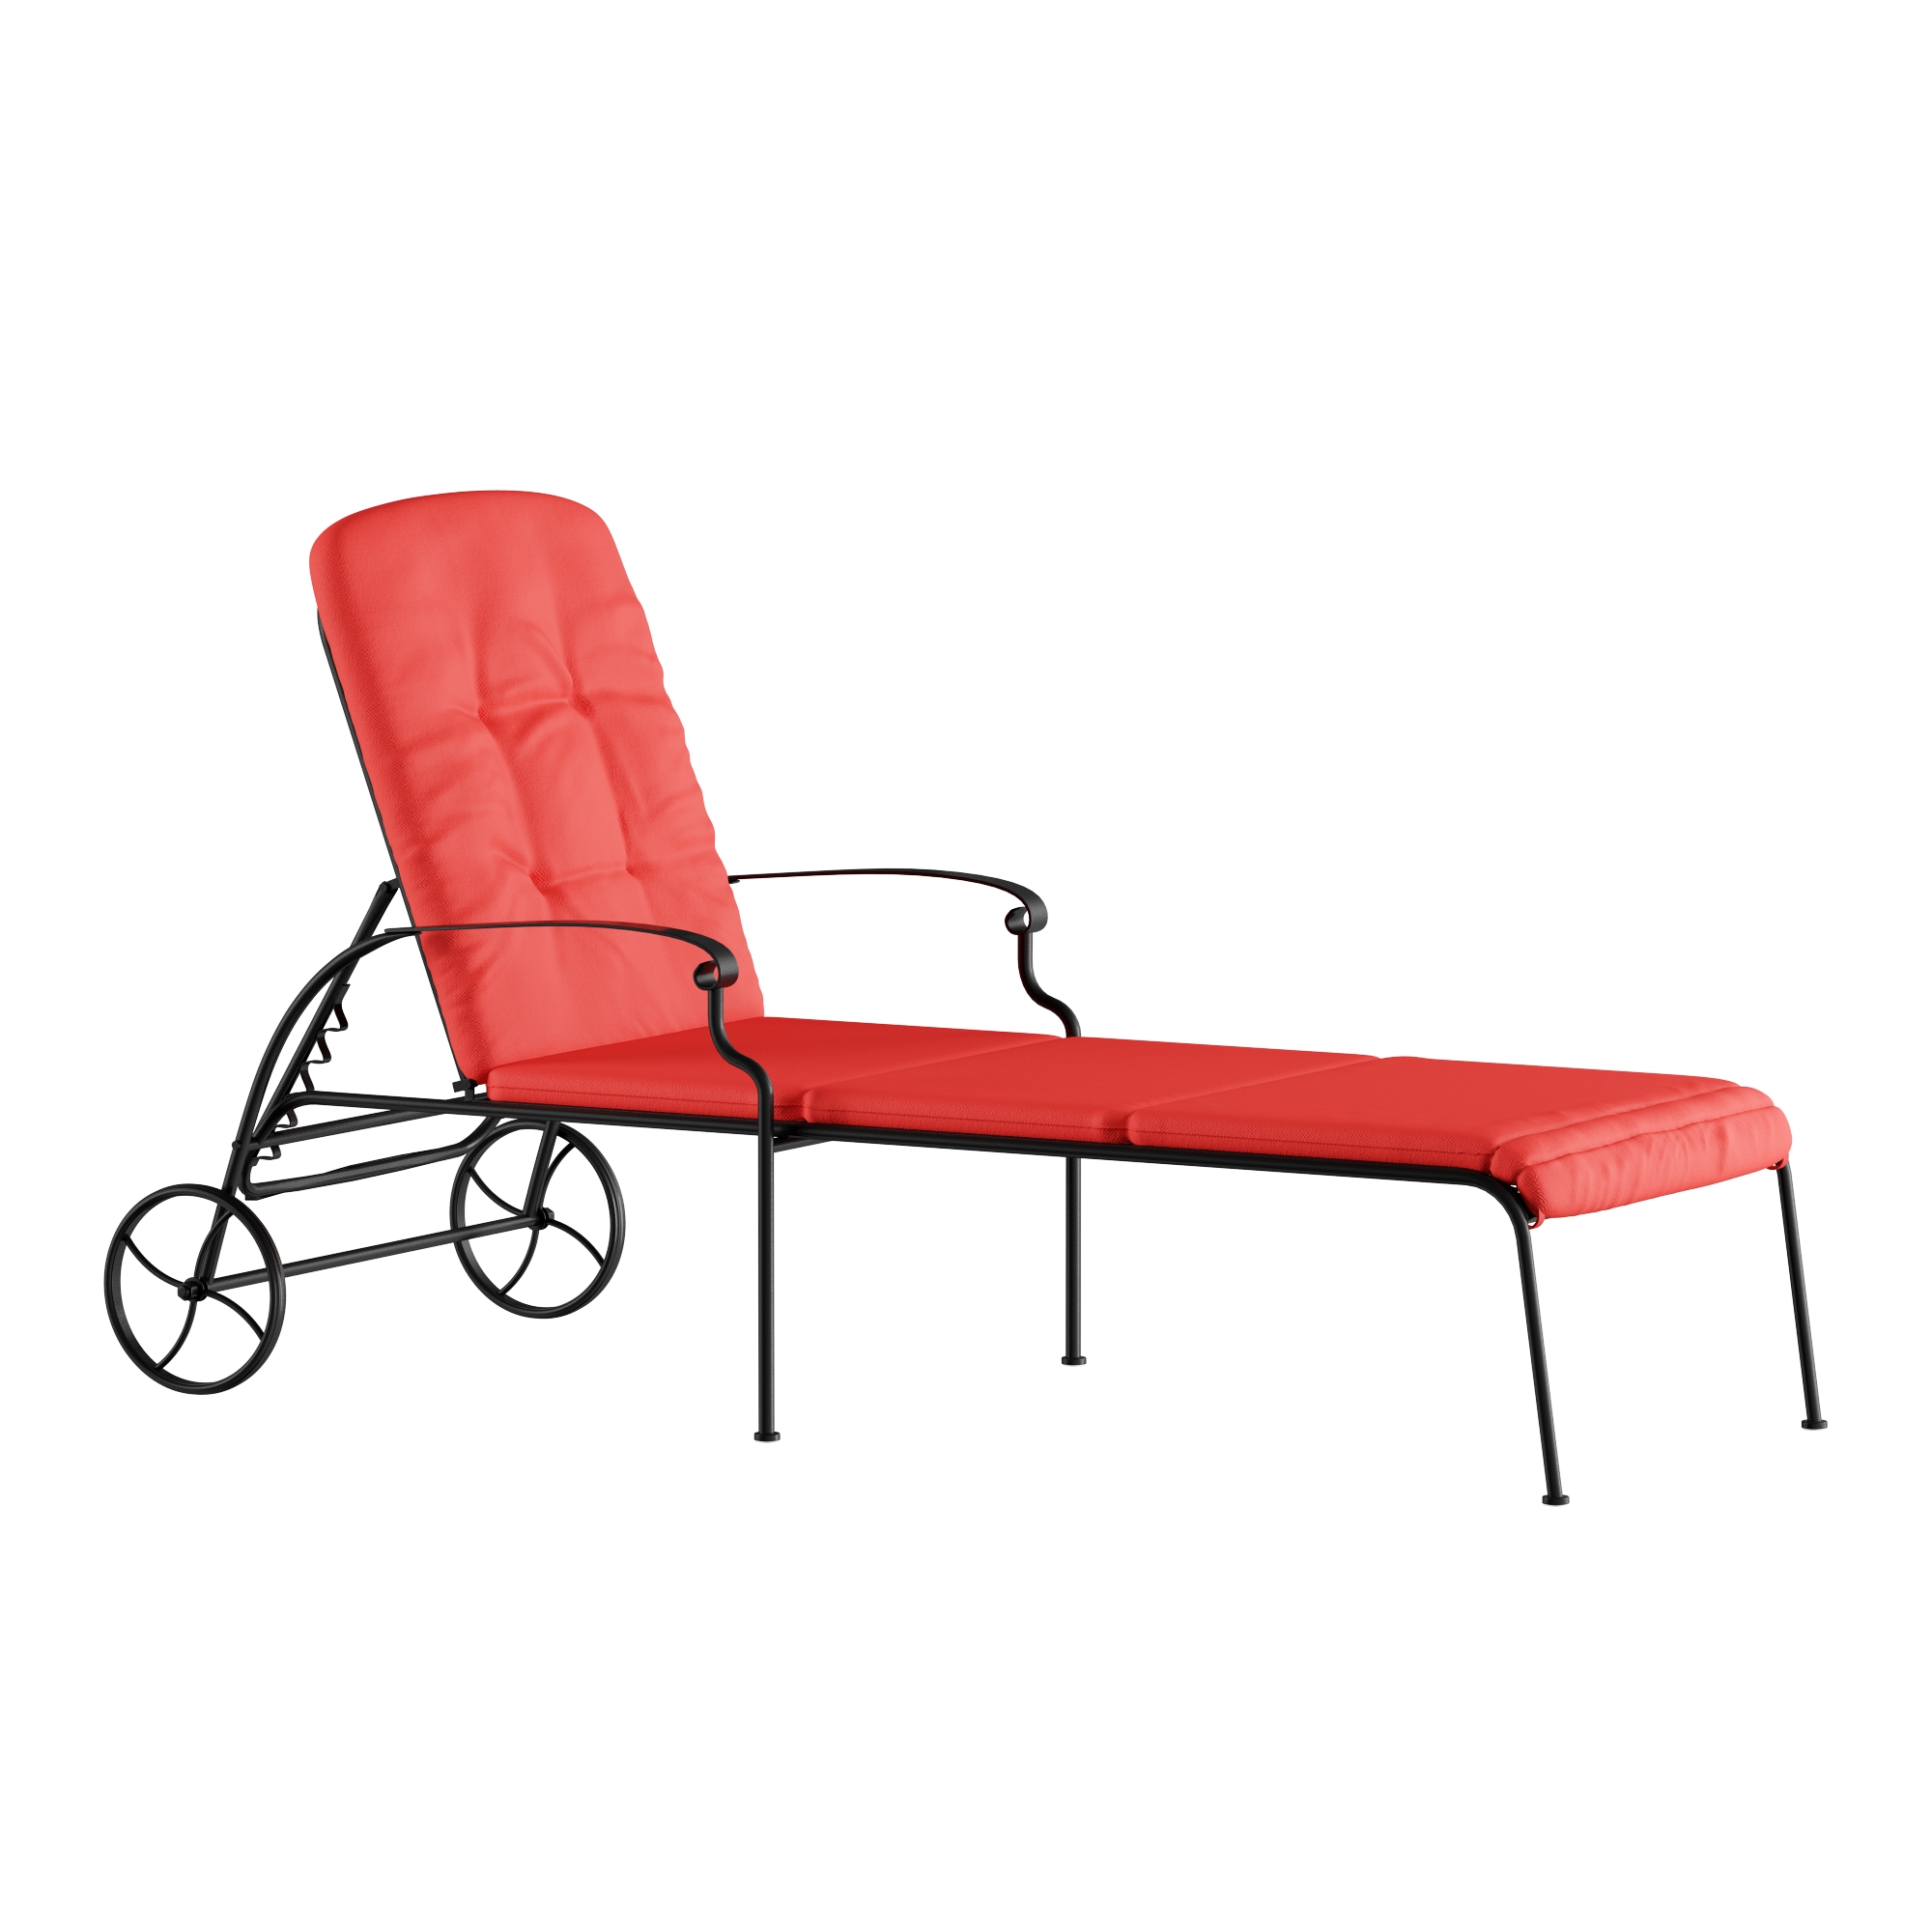 Matthewortile.com Chaise Lounge / Chaise Lounge Chairs Mathis Brothers - Shop designer versions ...